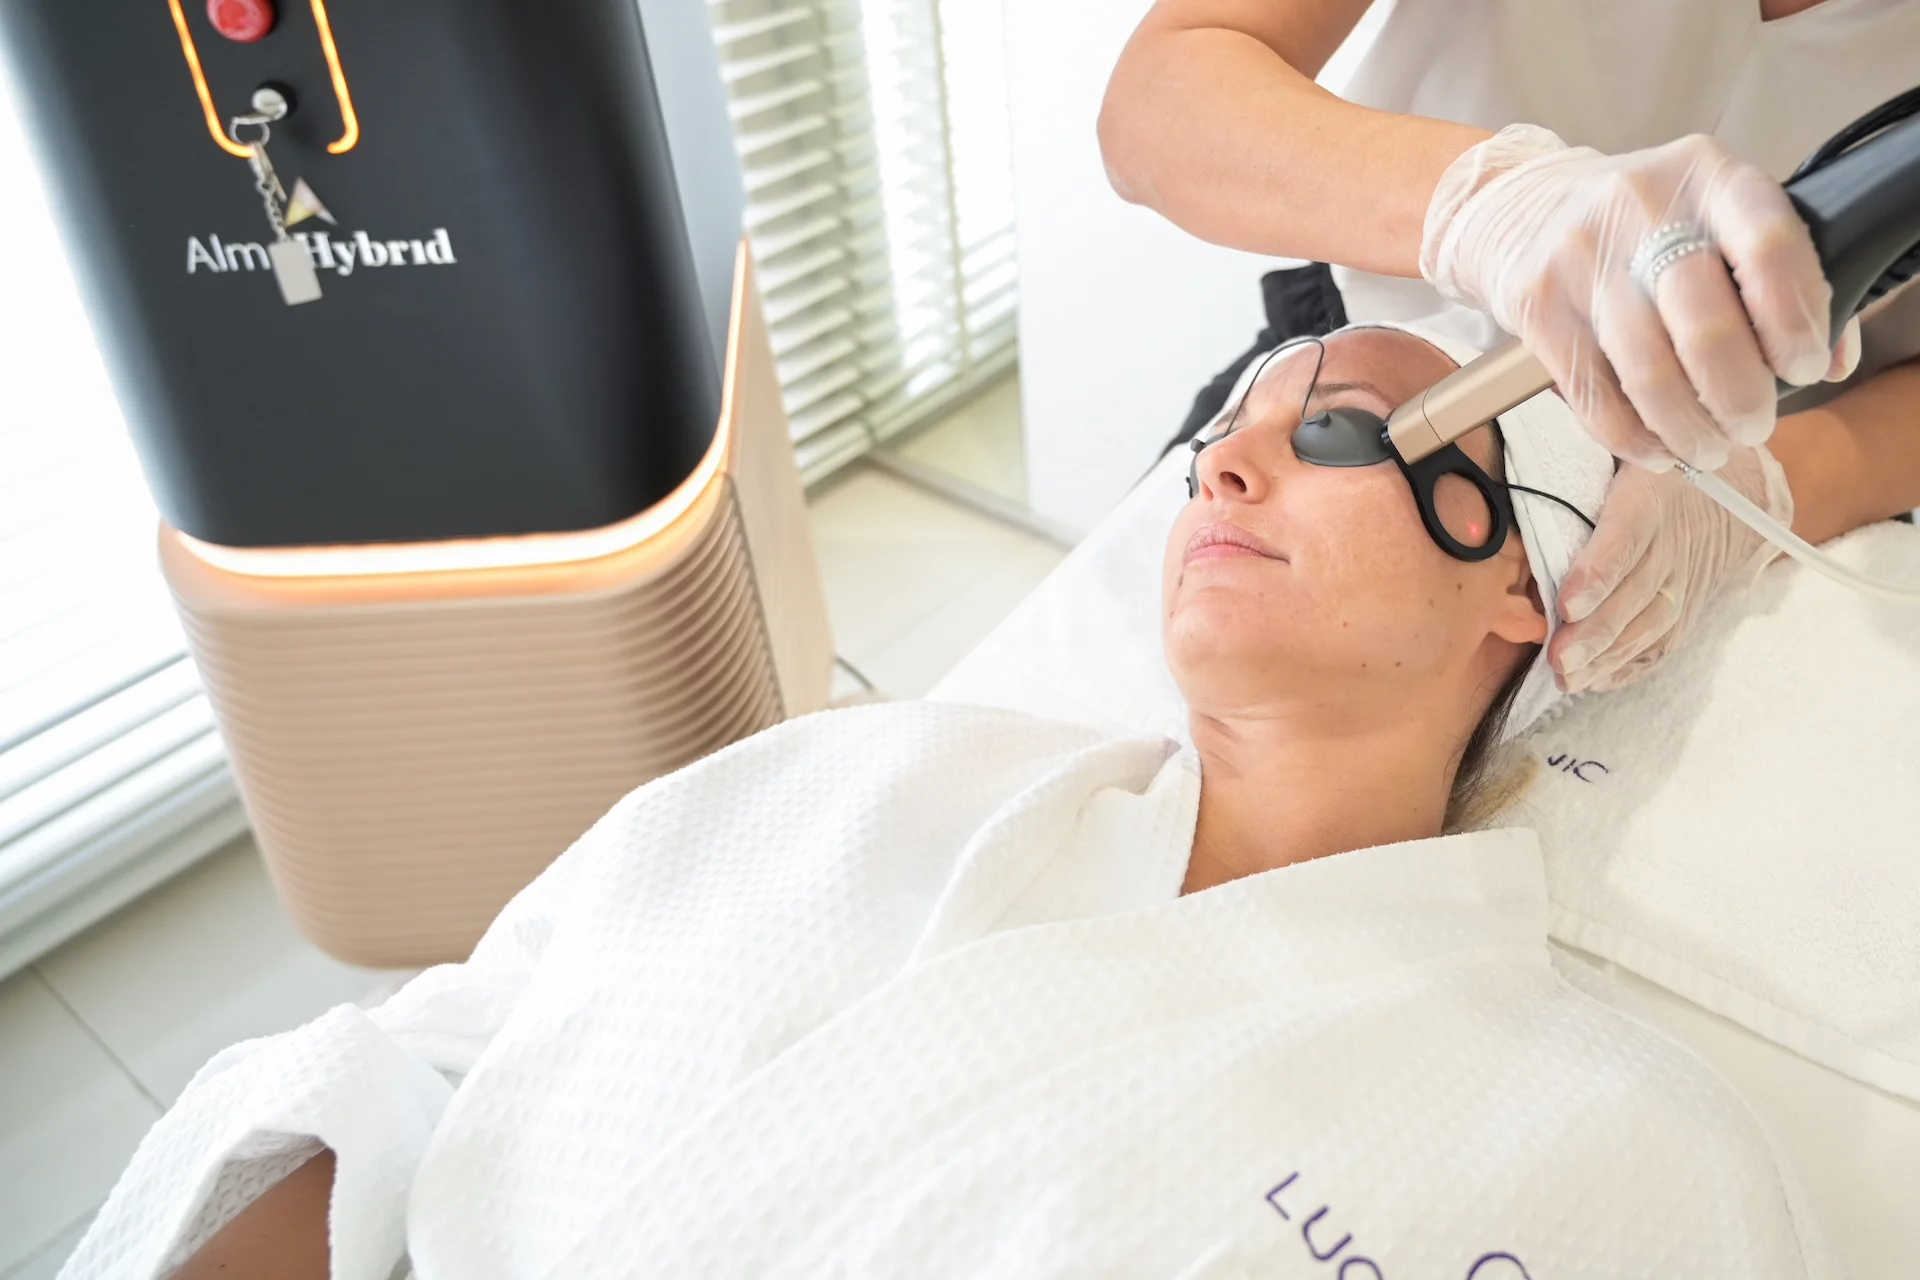 Fraxel laser therapy for non-invasive skin rejuvenation - eliminate different skin blemishes with a safe fractional laser that triggers skin healing processes.